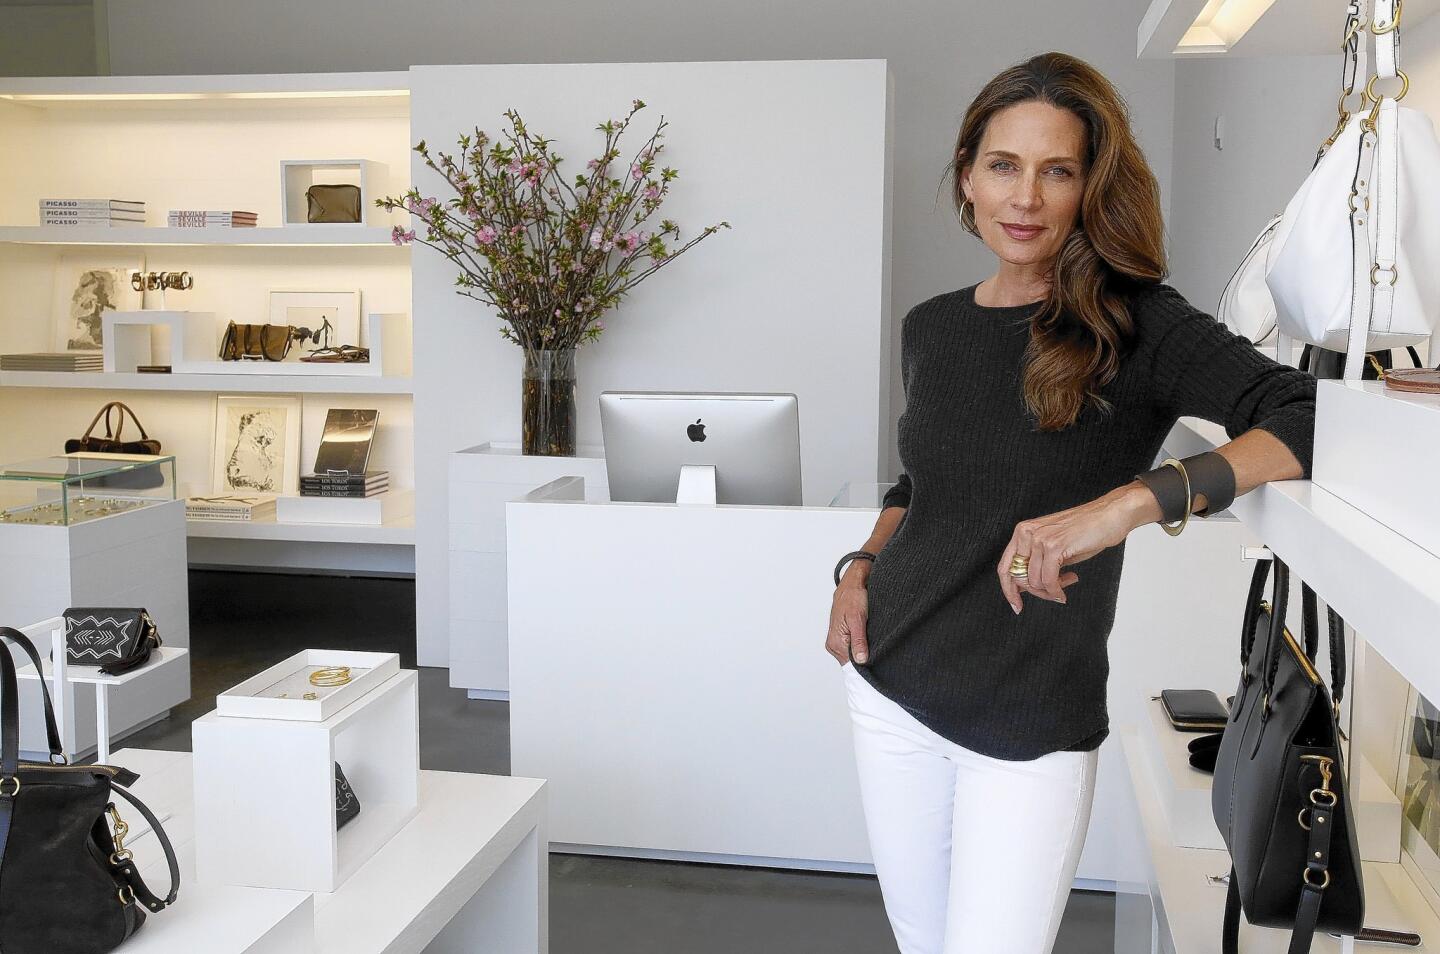 Fashion designer Kendall Conrad, who made her mark in handbags, is expanding into footwear and brass jewelry.